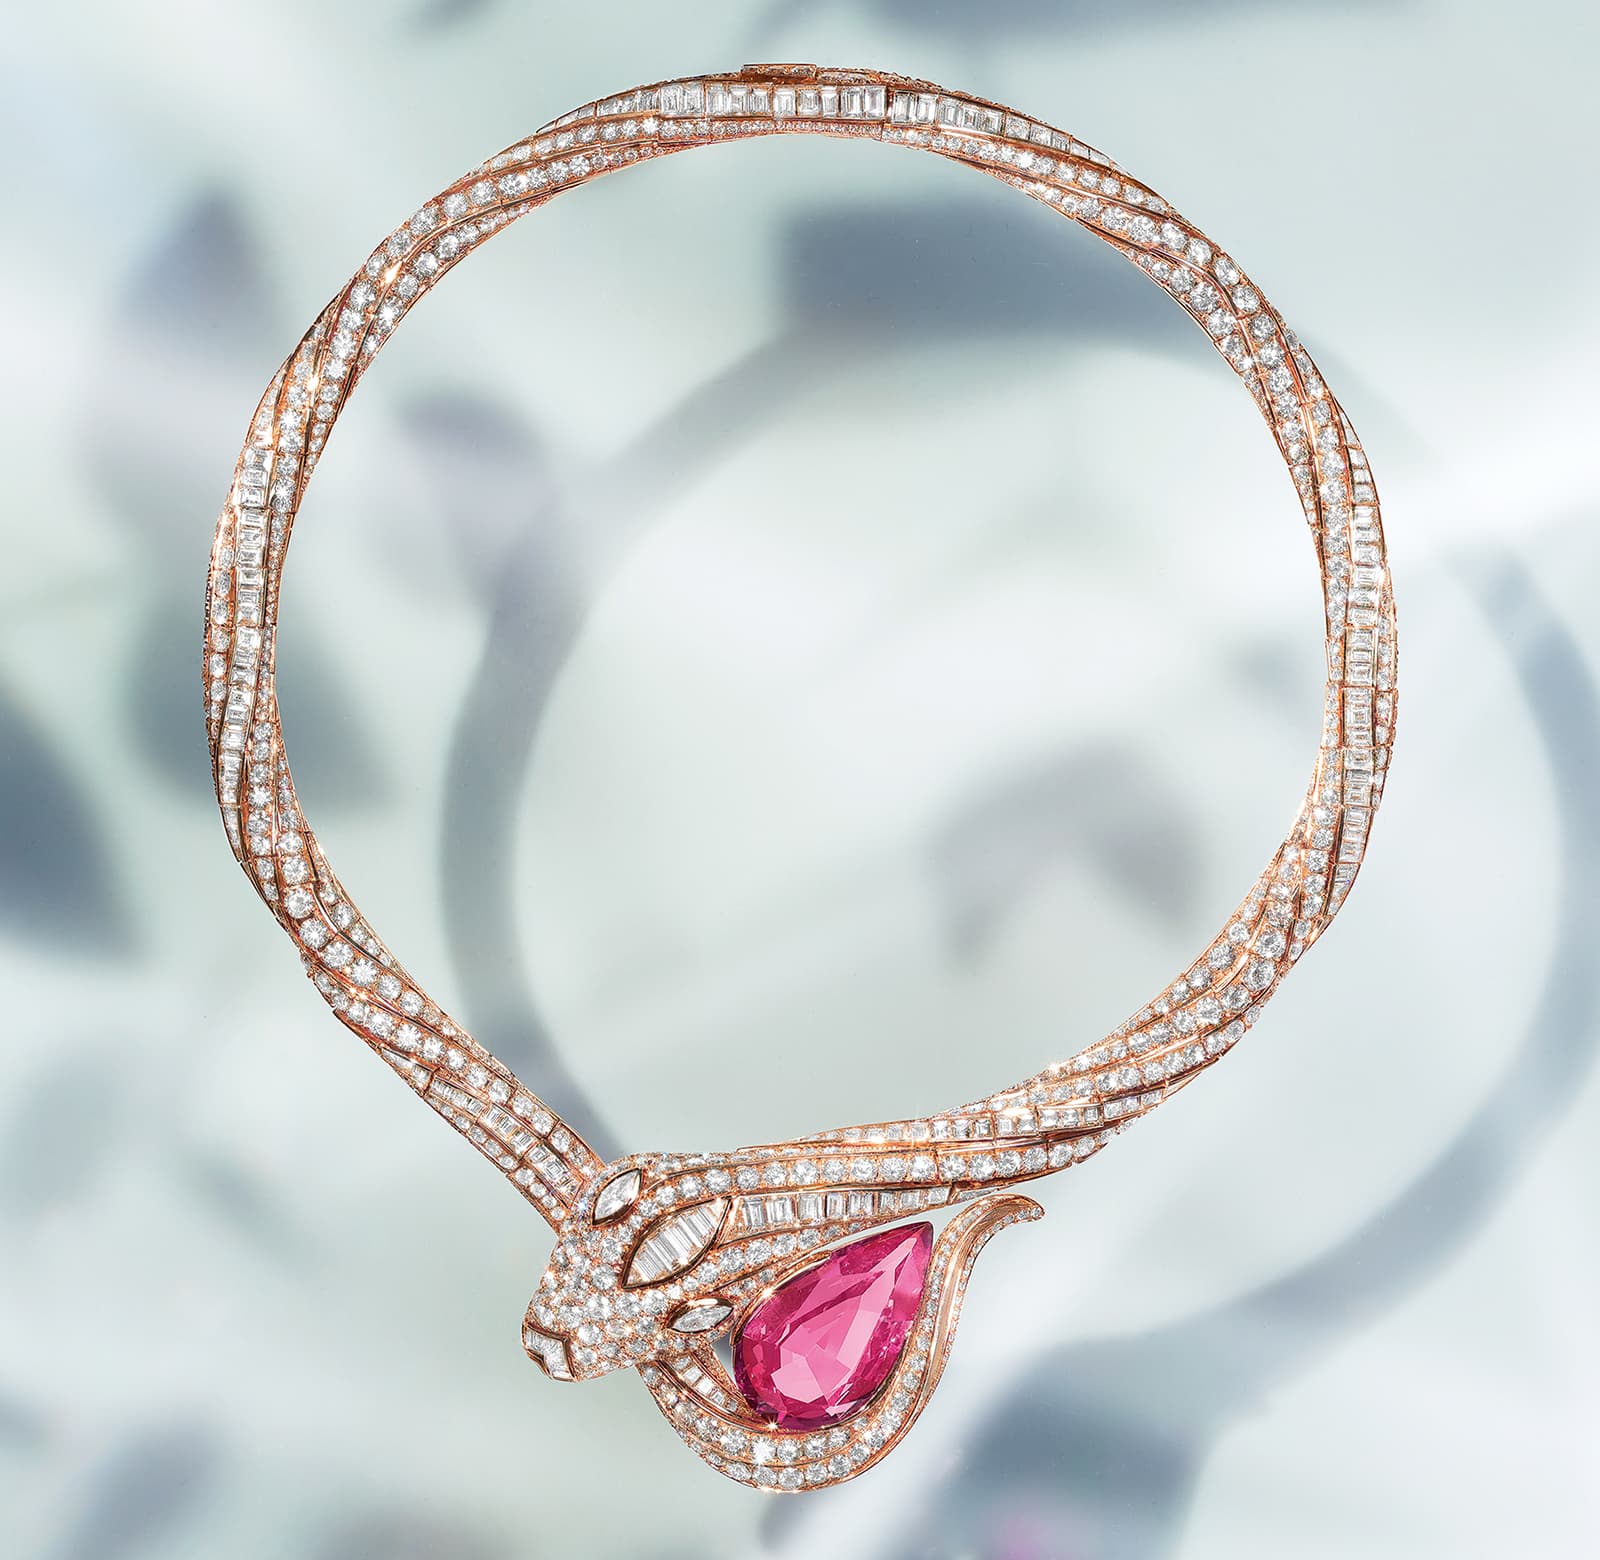 Bulgari Serpenti Spinel Embrace necklace with a 25.70 carat drop-shaped raspberry pink spinel from the Eden The Garden of Wonders High Jewellery collection